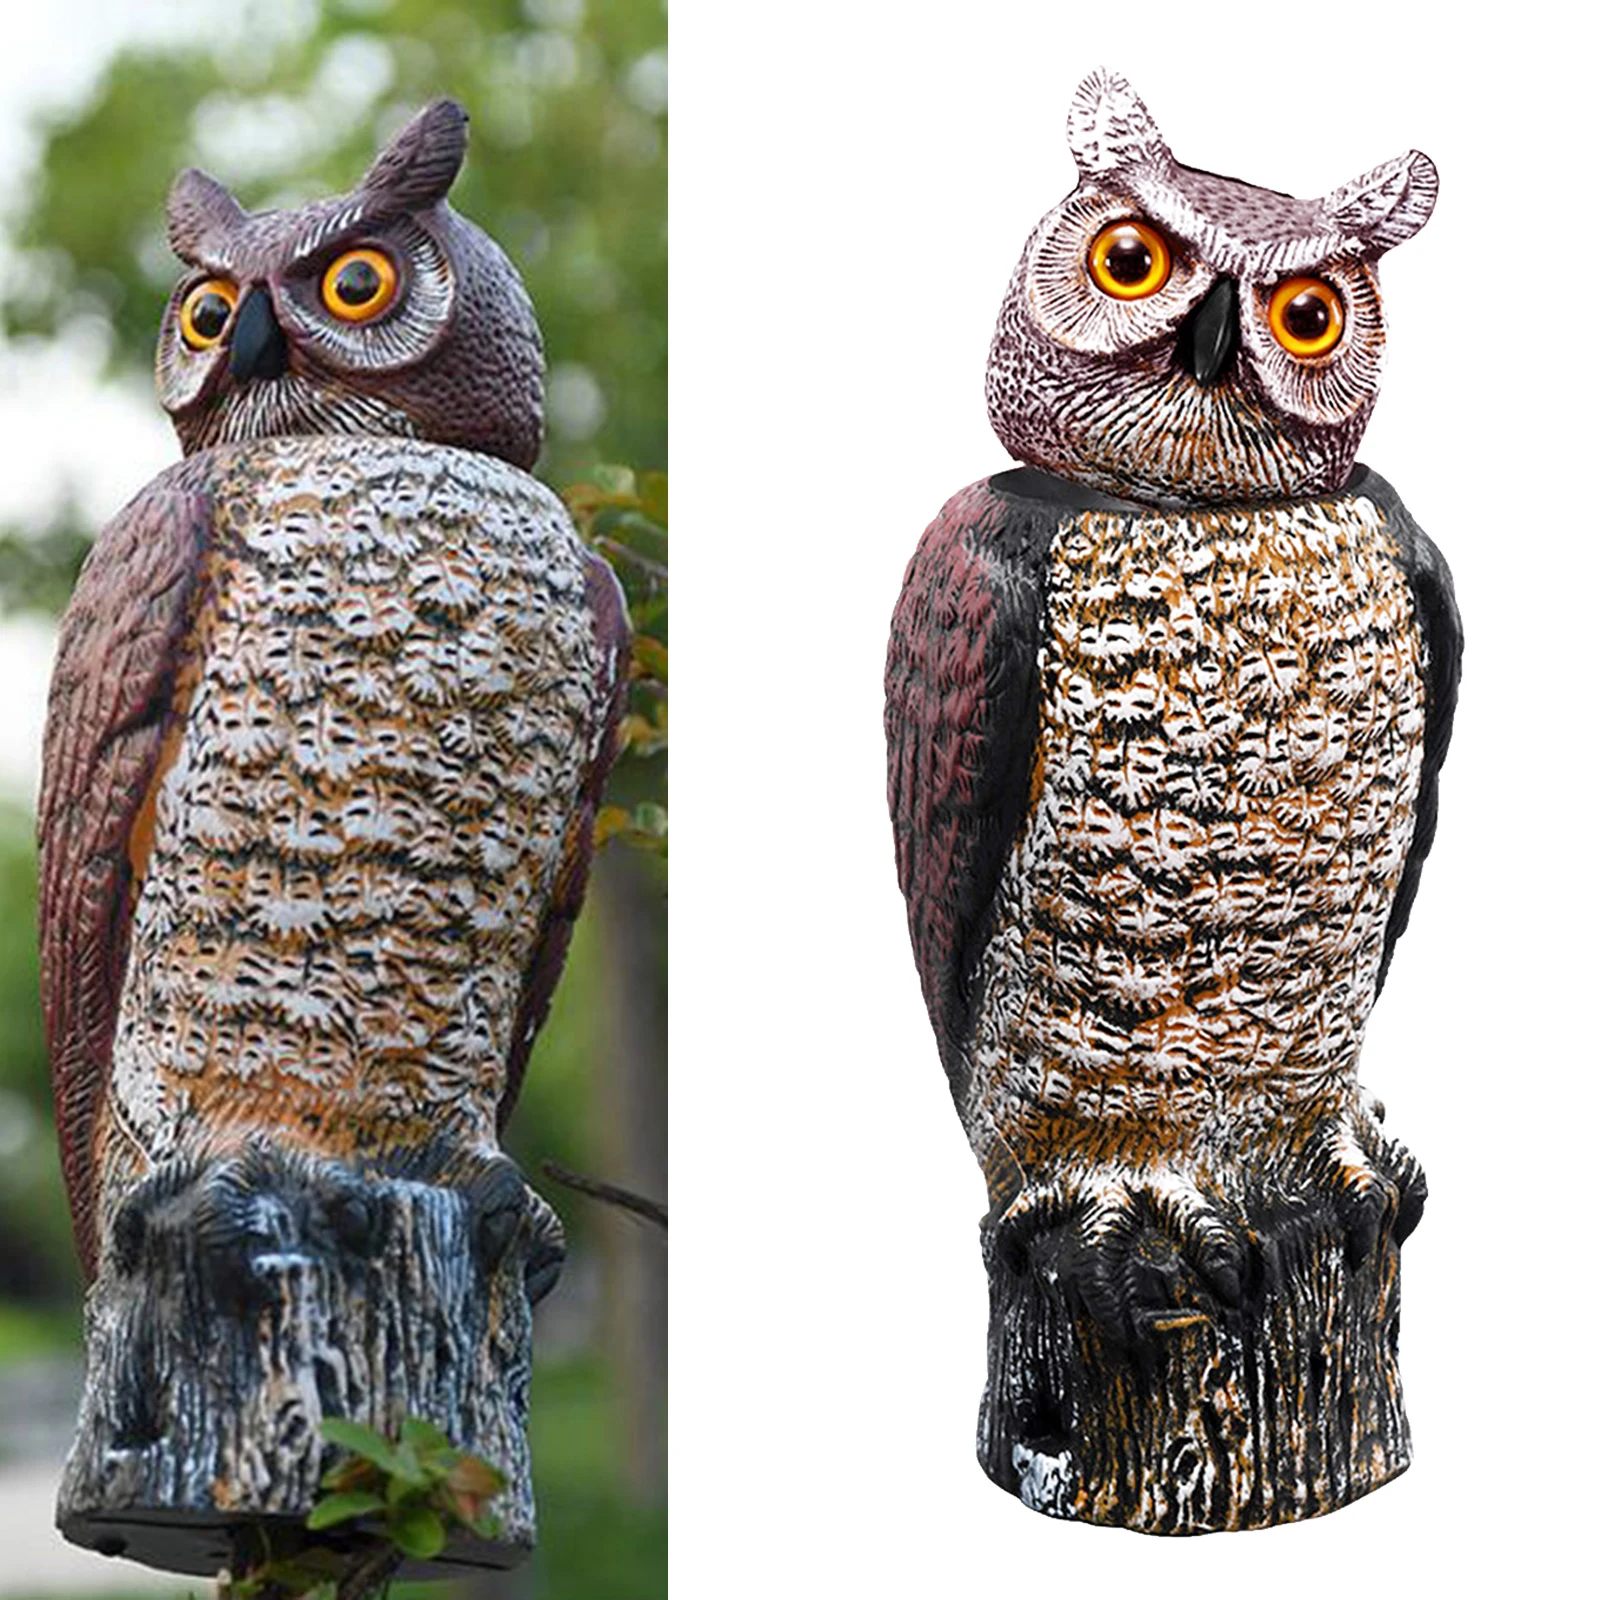 Handpainted Owl Decoy Statue with Rotating Head Bird Crow Scarer Scarecrow 18inch Tall